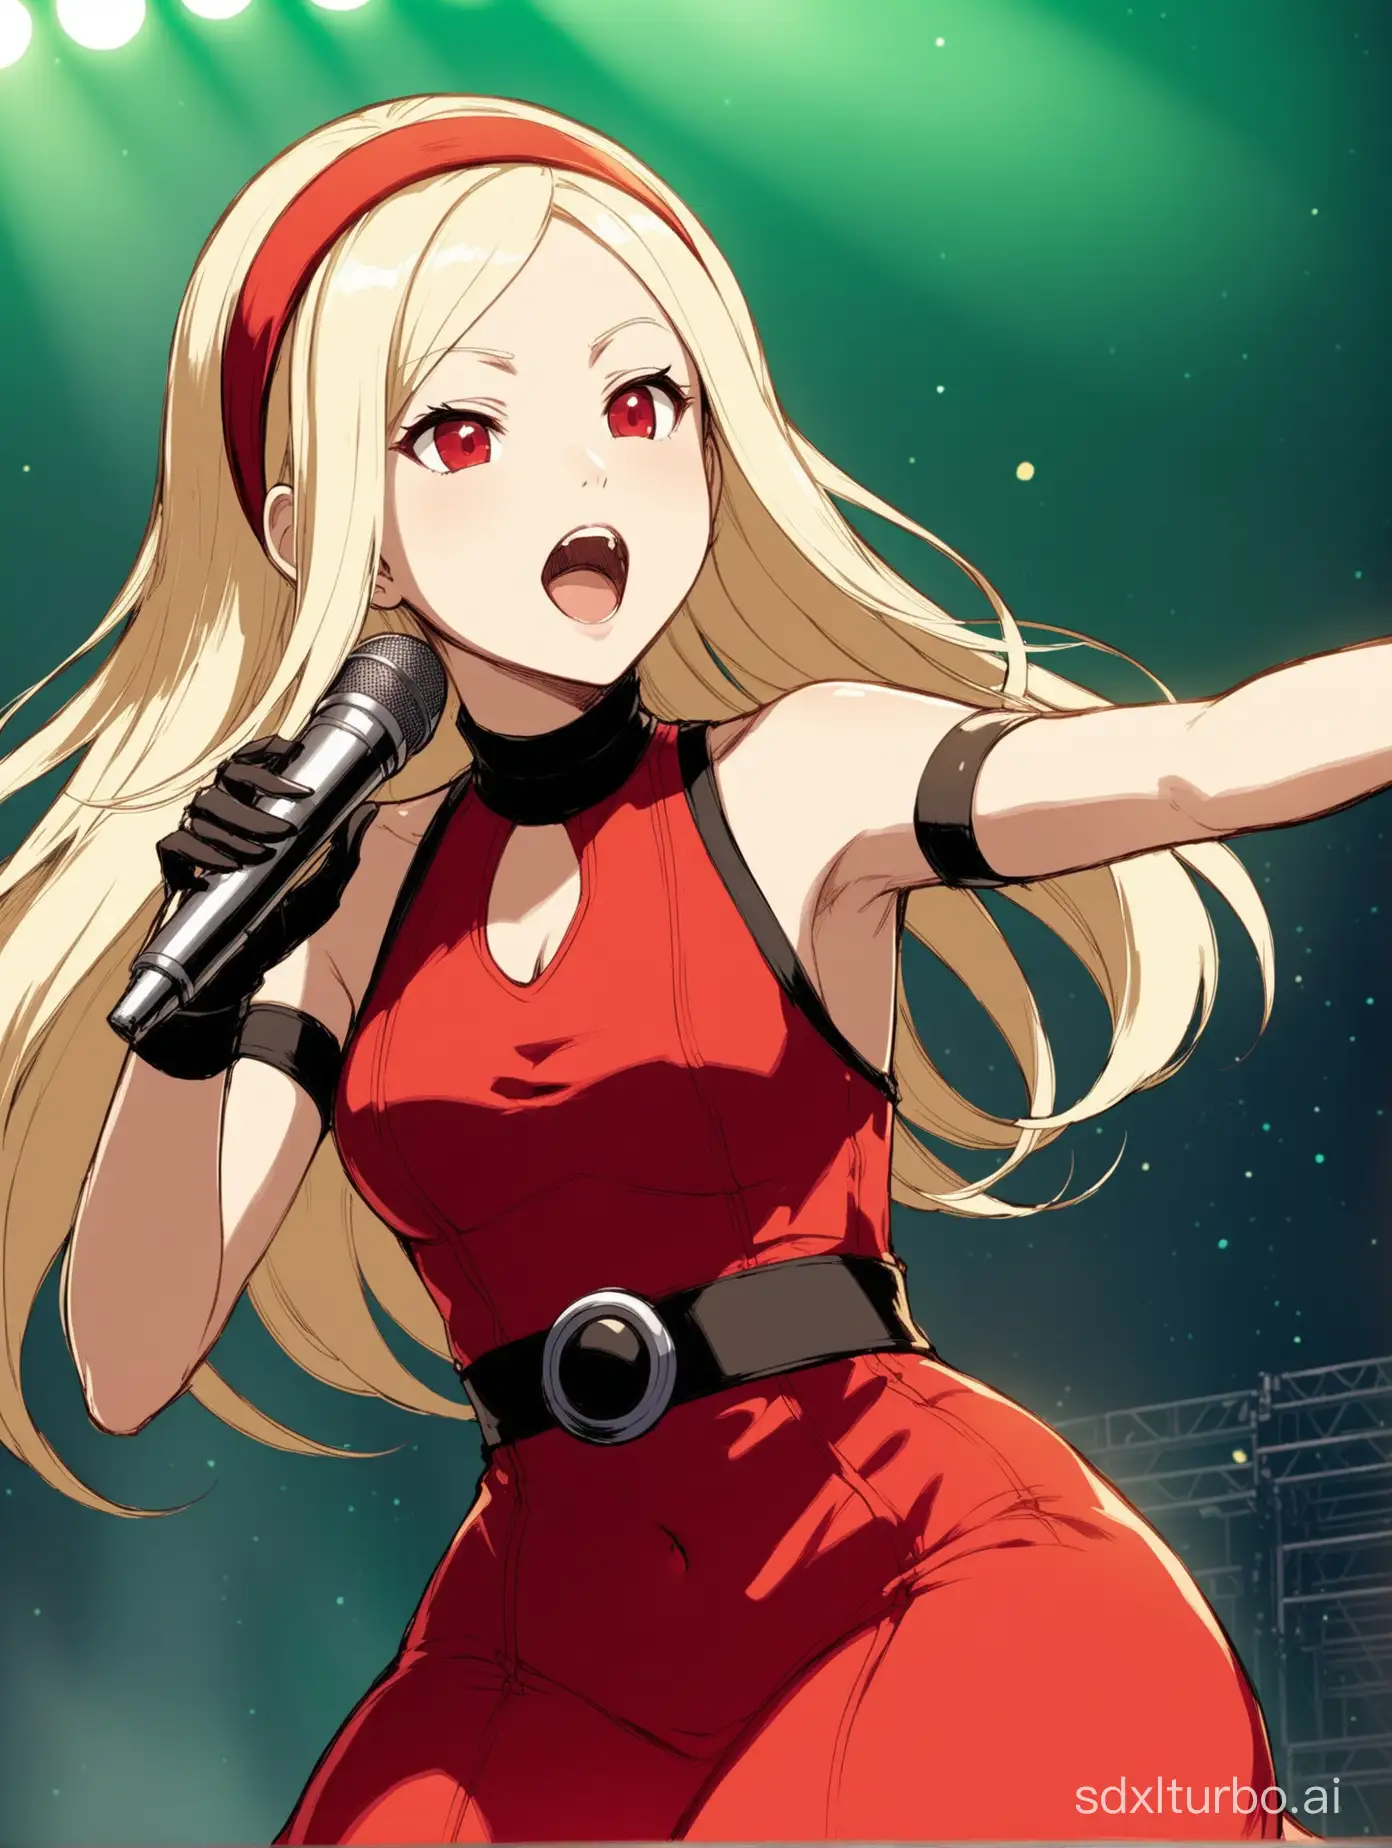 Kat-from-Gravity-Rush-2-Performing-on-Stage-in-a-Vibrant-Red-Dress-and-Hairband